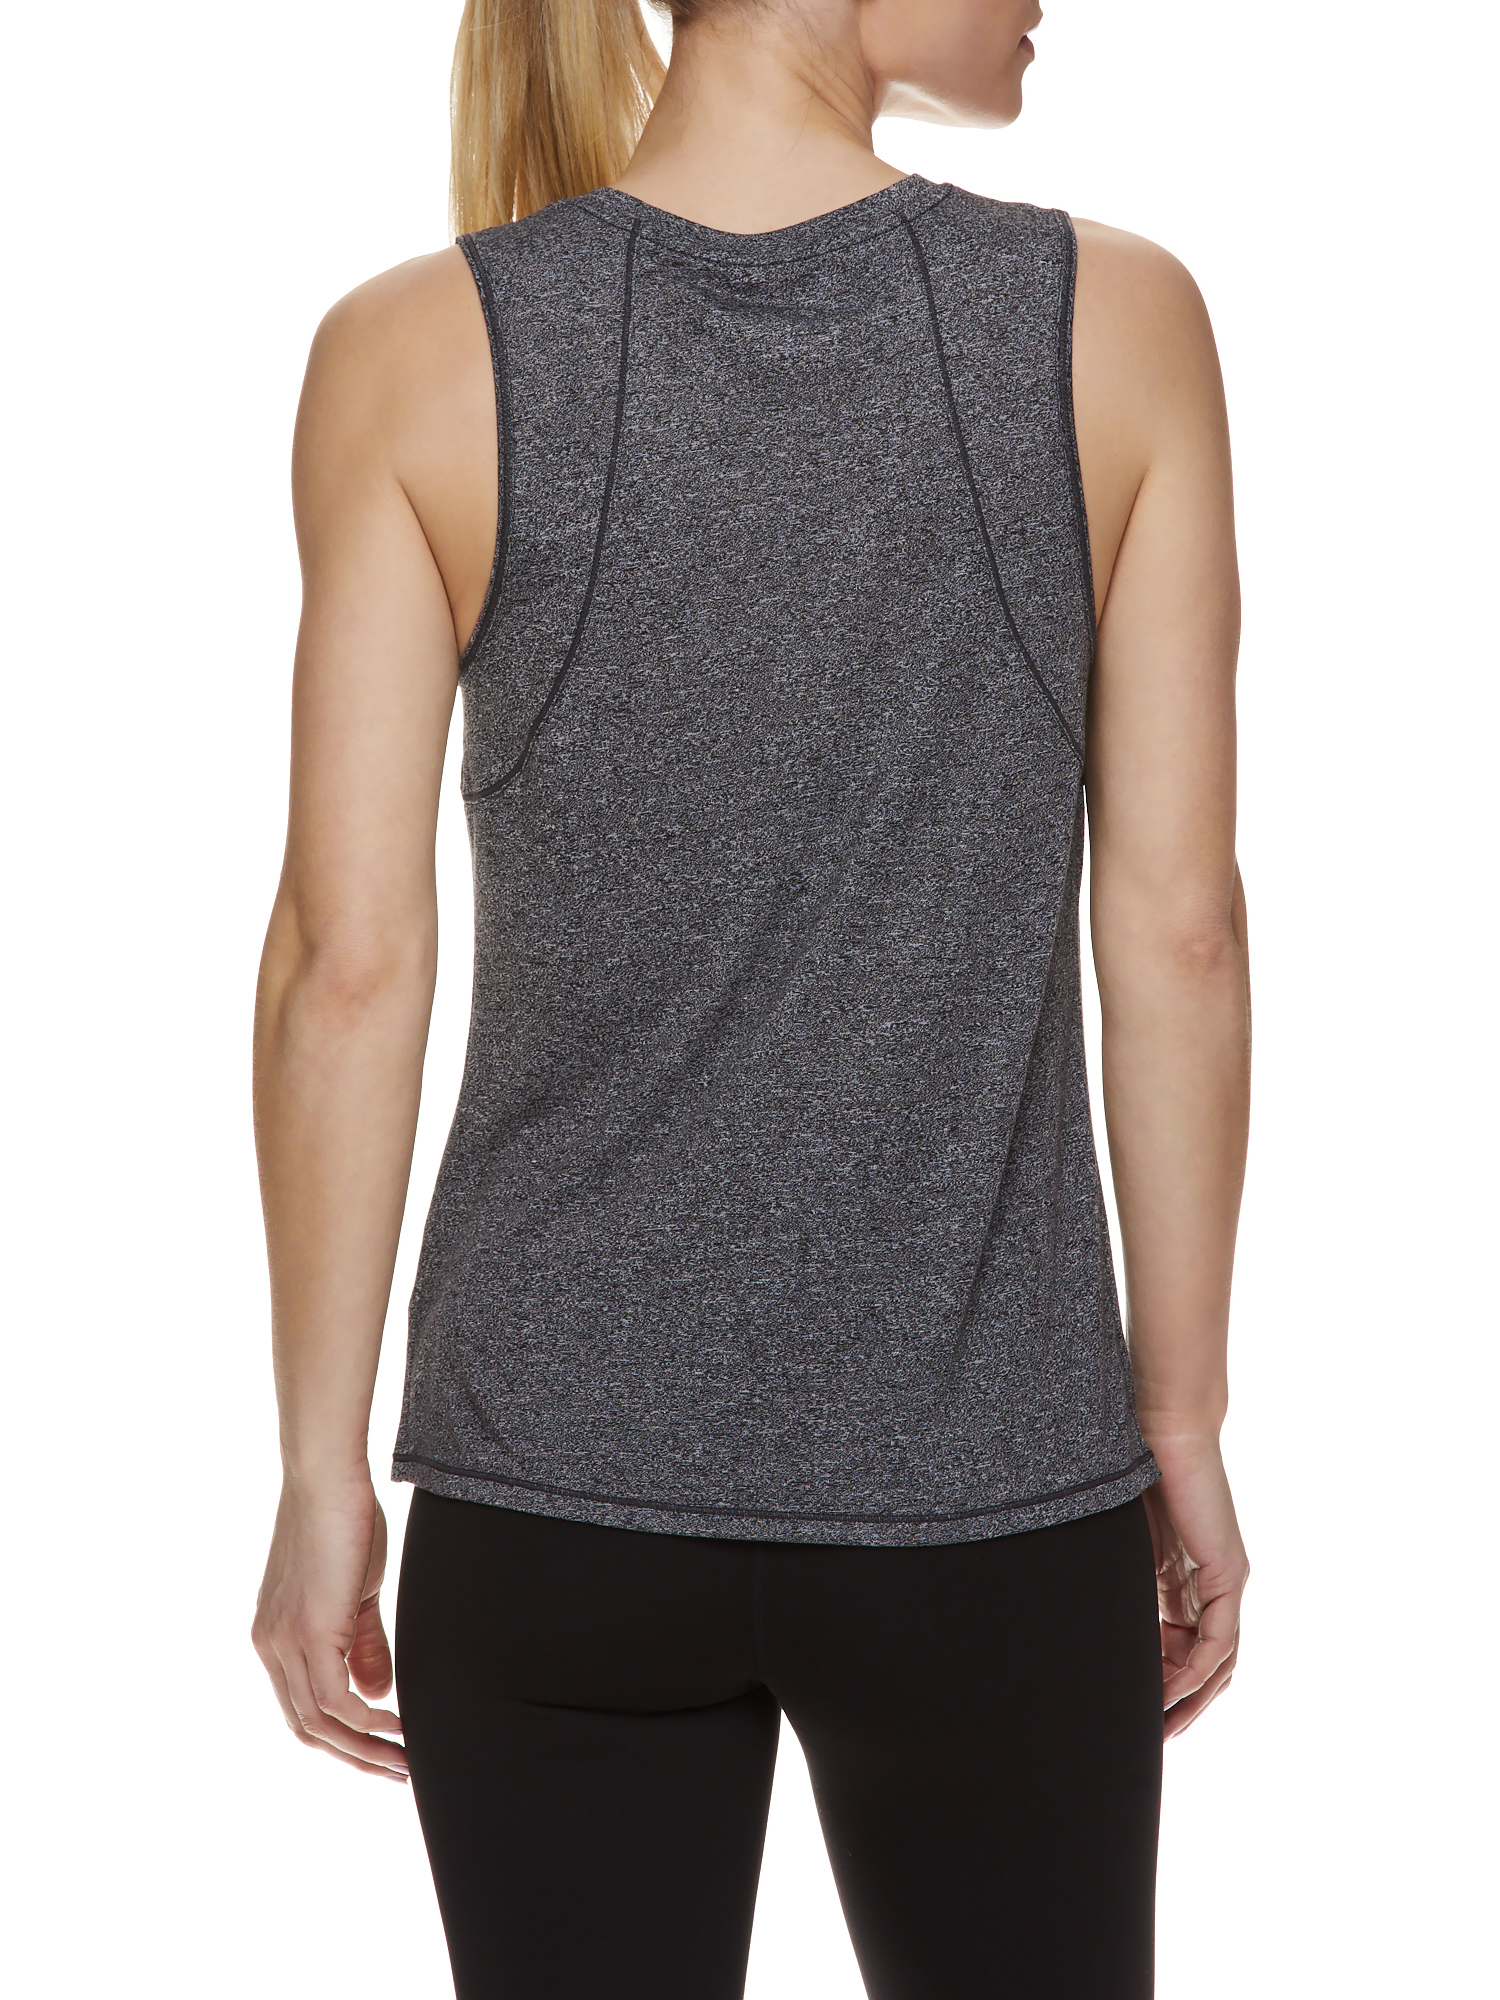 Reebok Womens Muscle Graphic Tank Top - image 4 of 4